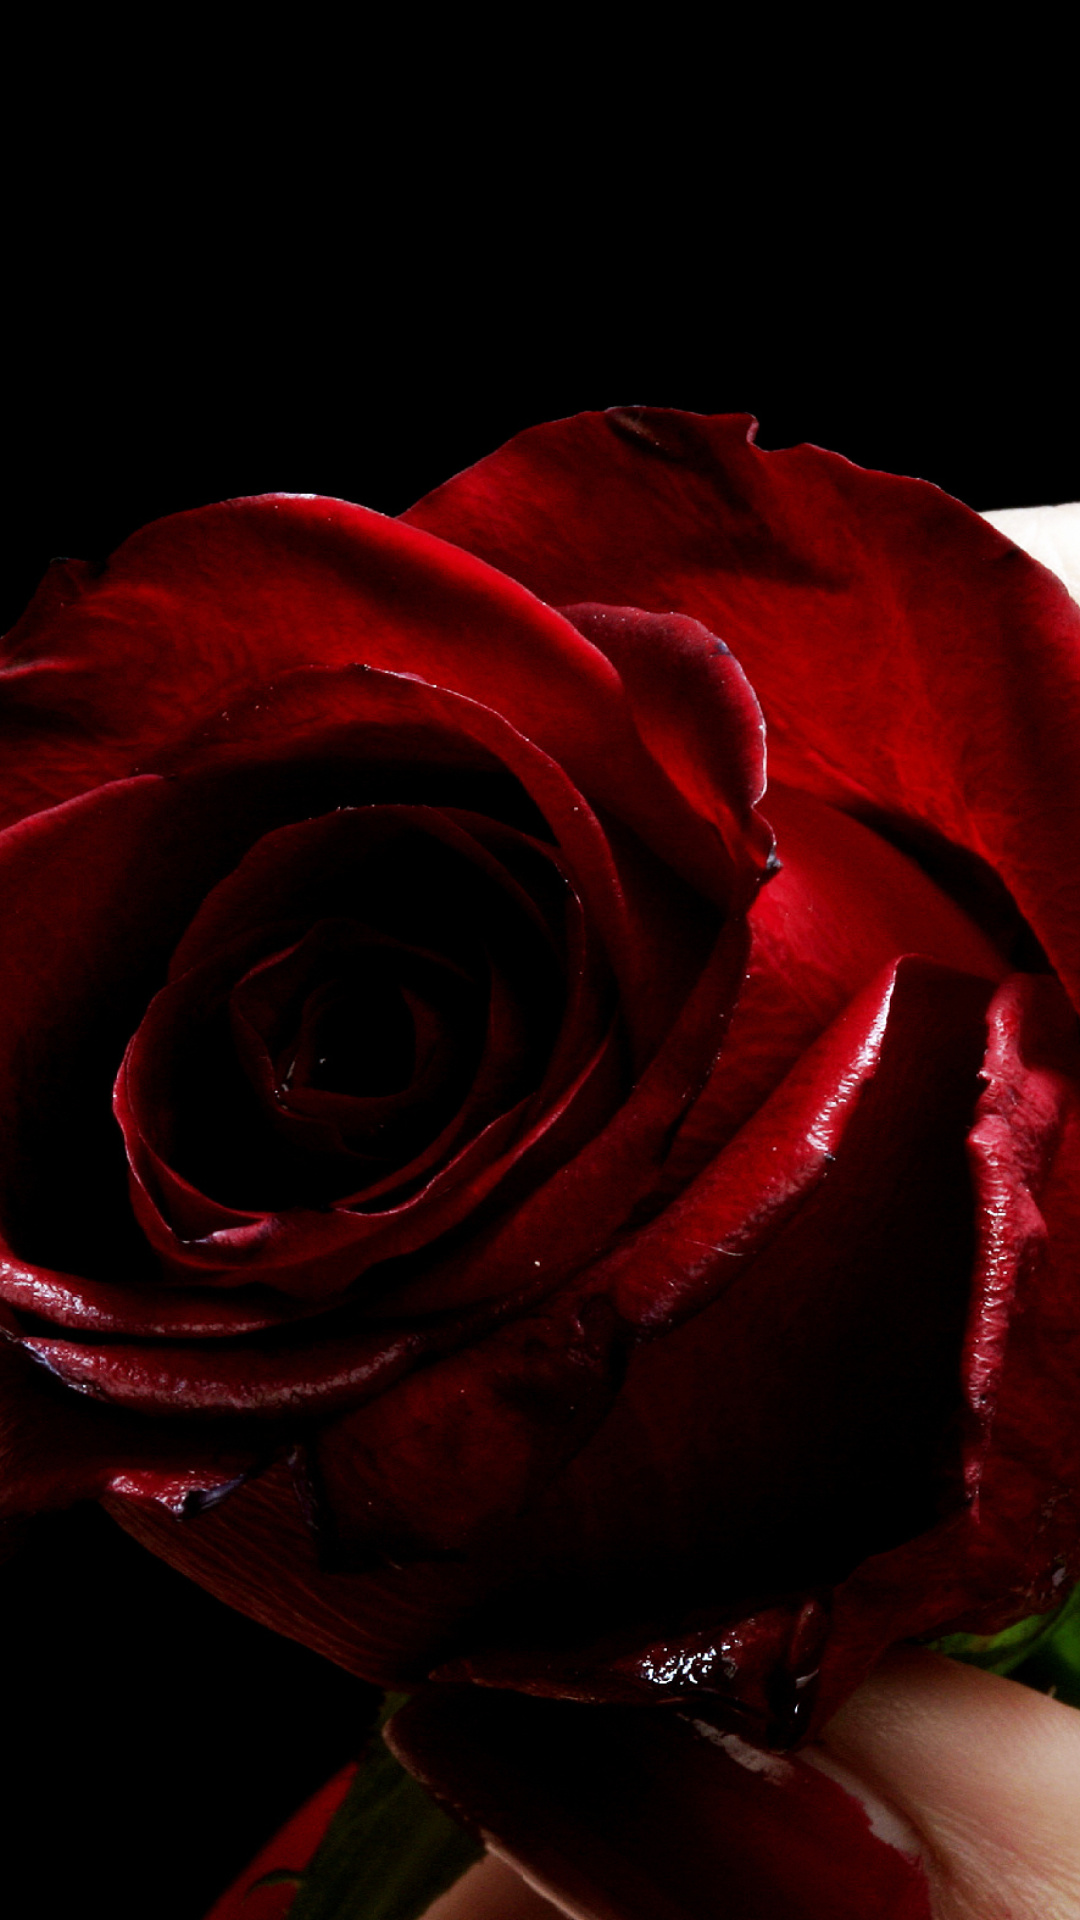 Das Red Rose and Lipstick Wallpaper 1080x1920